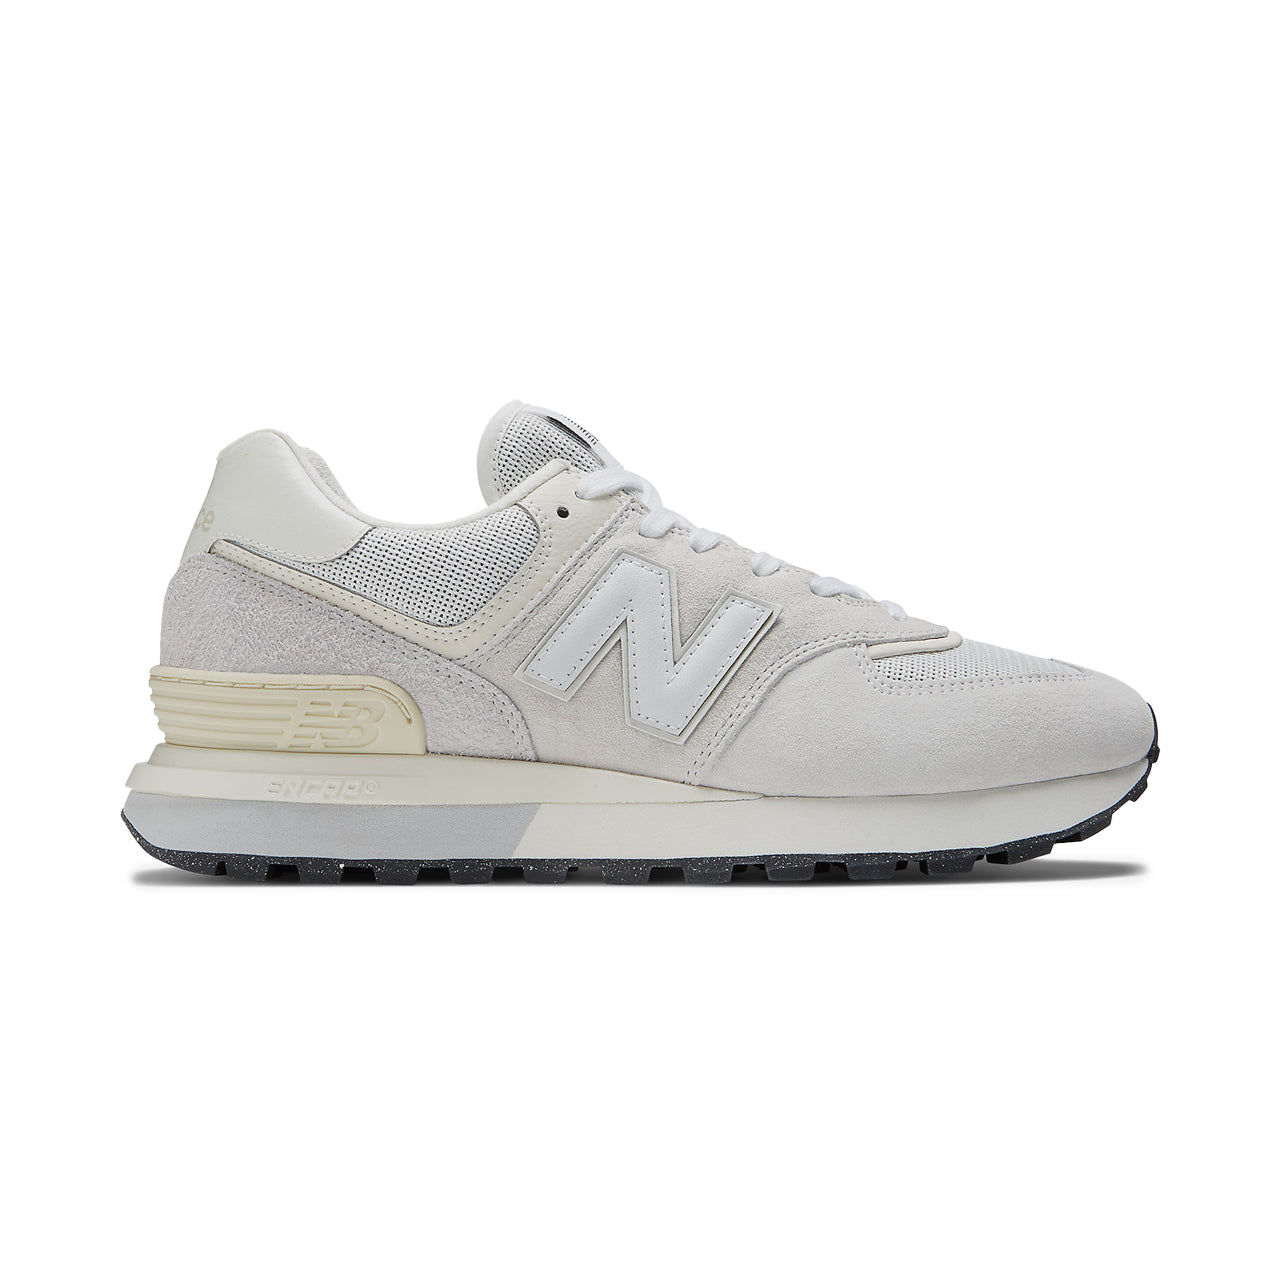 New Balance 574 Grey White | Uncrate